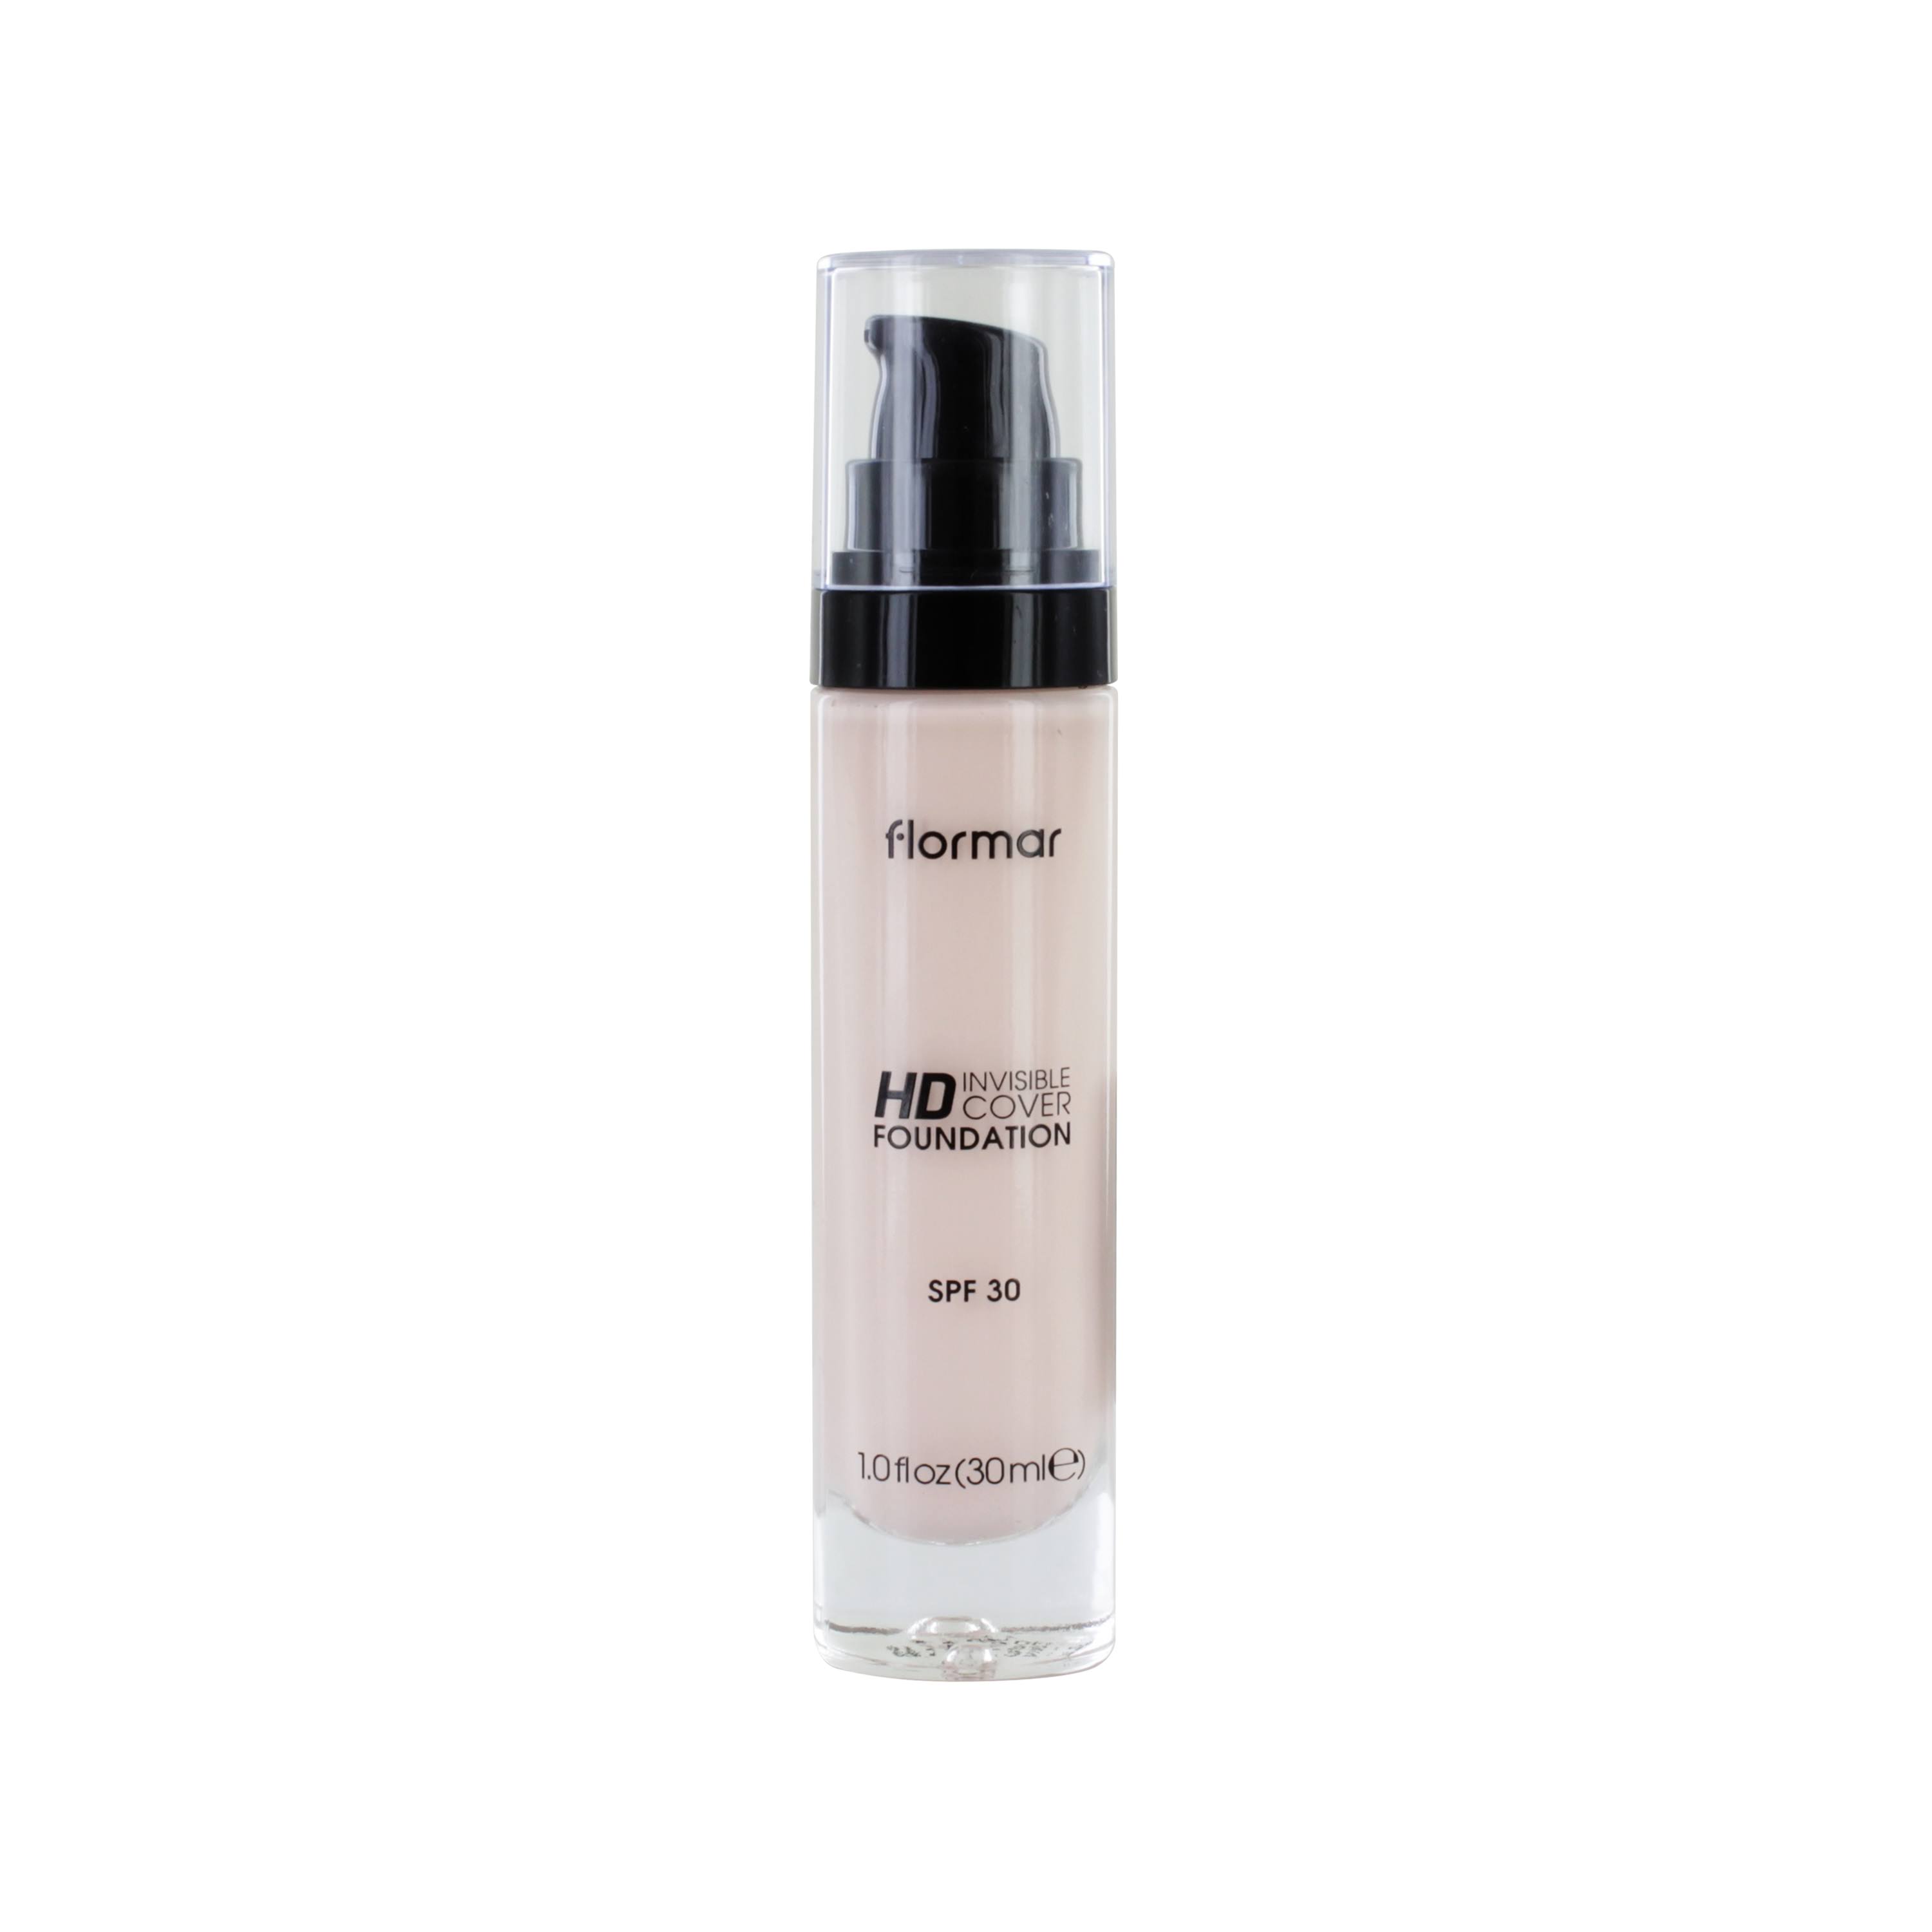 Flormar Invisible Cover Hd Foundation - 10 Pink Porcelain, SPF 30, 30ml